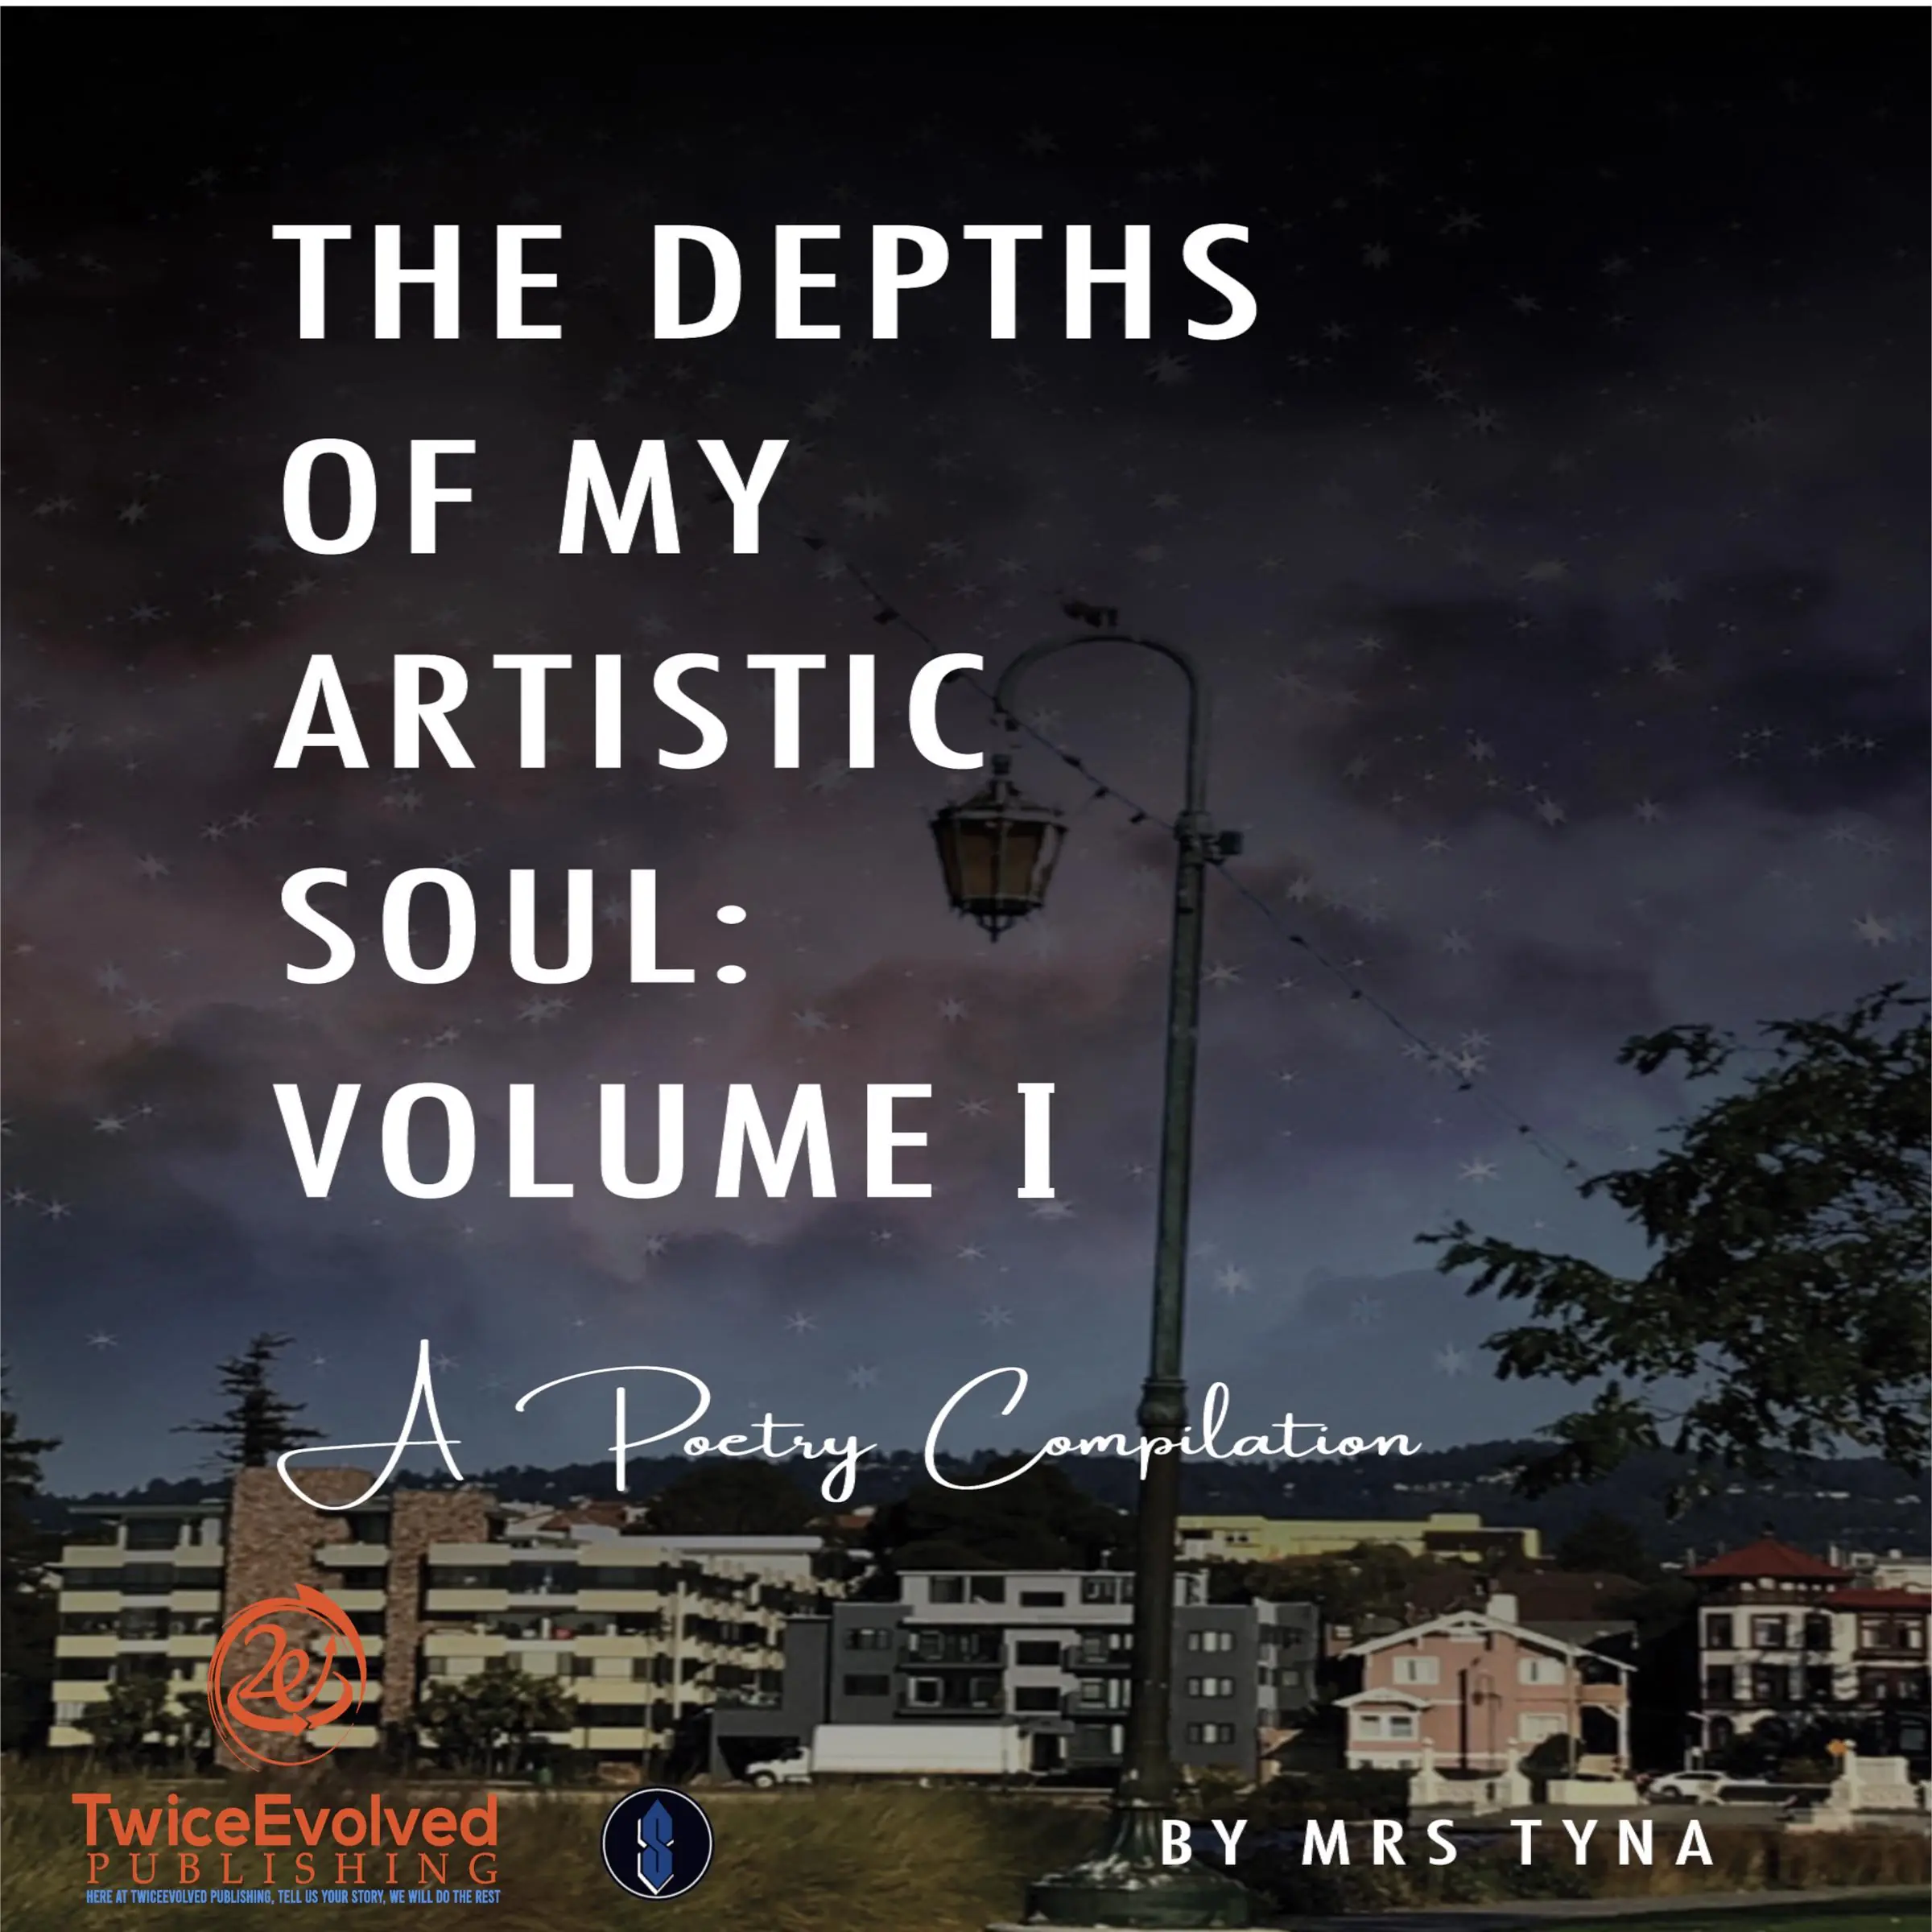 The Depths Of My Artistic Soul: Vol. I Audiobook by Mrs. Tyna